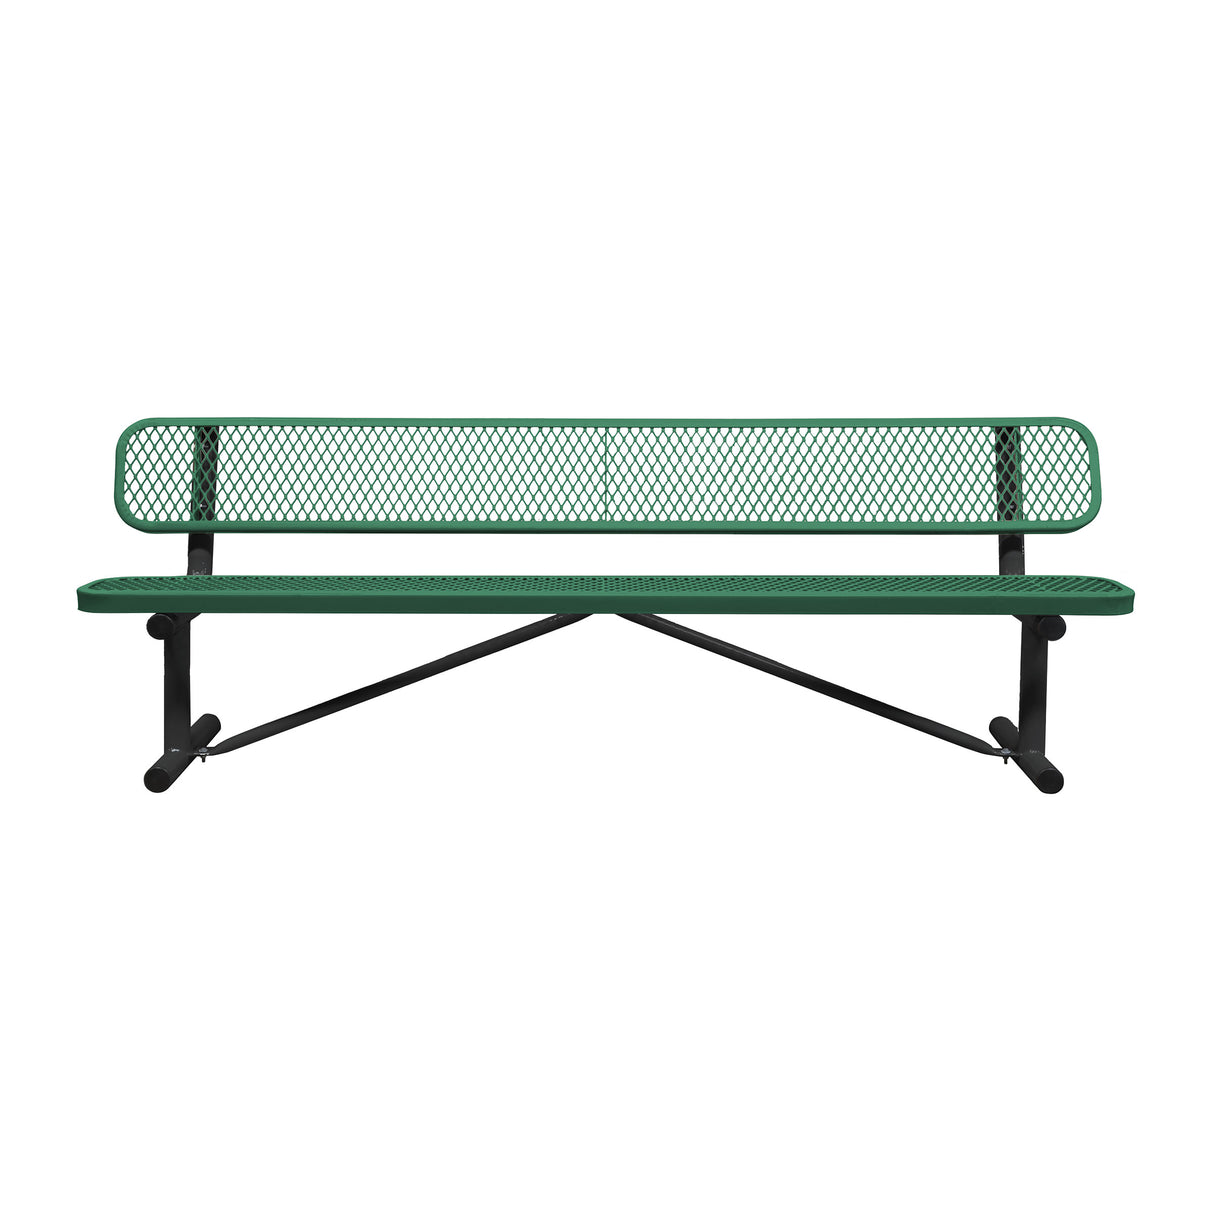 Standard Expanded Metal Bench With Back